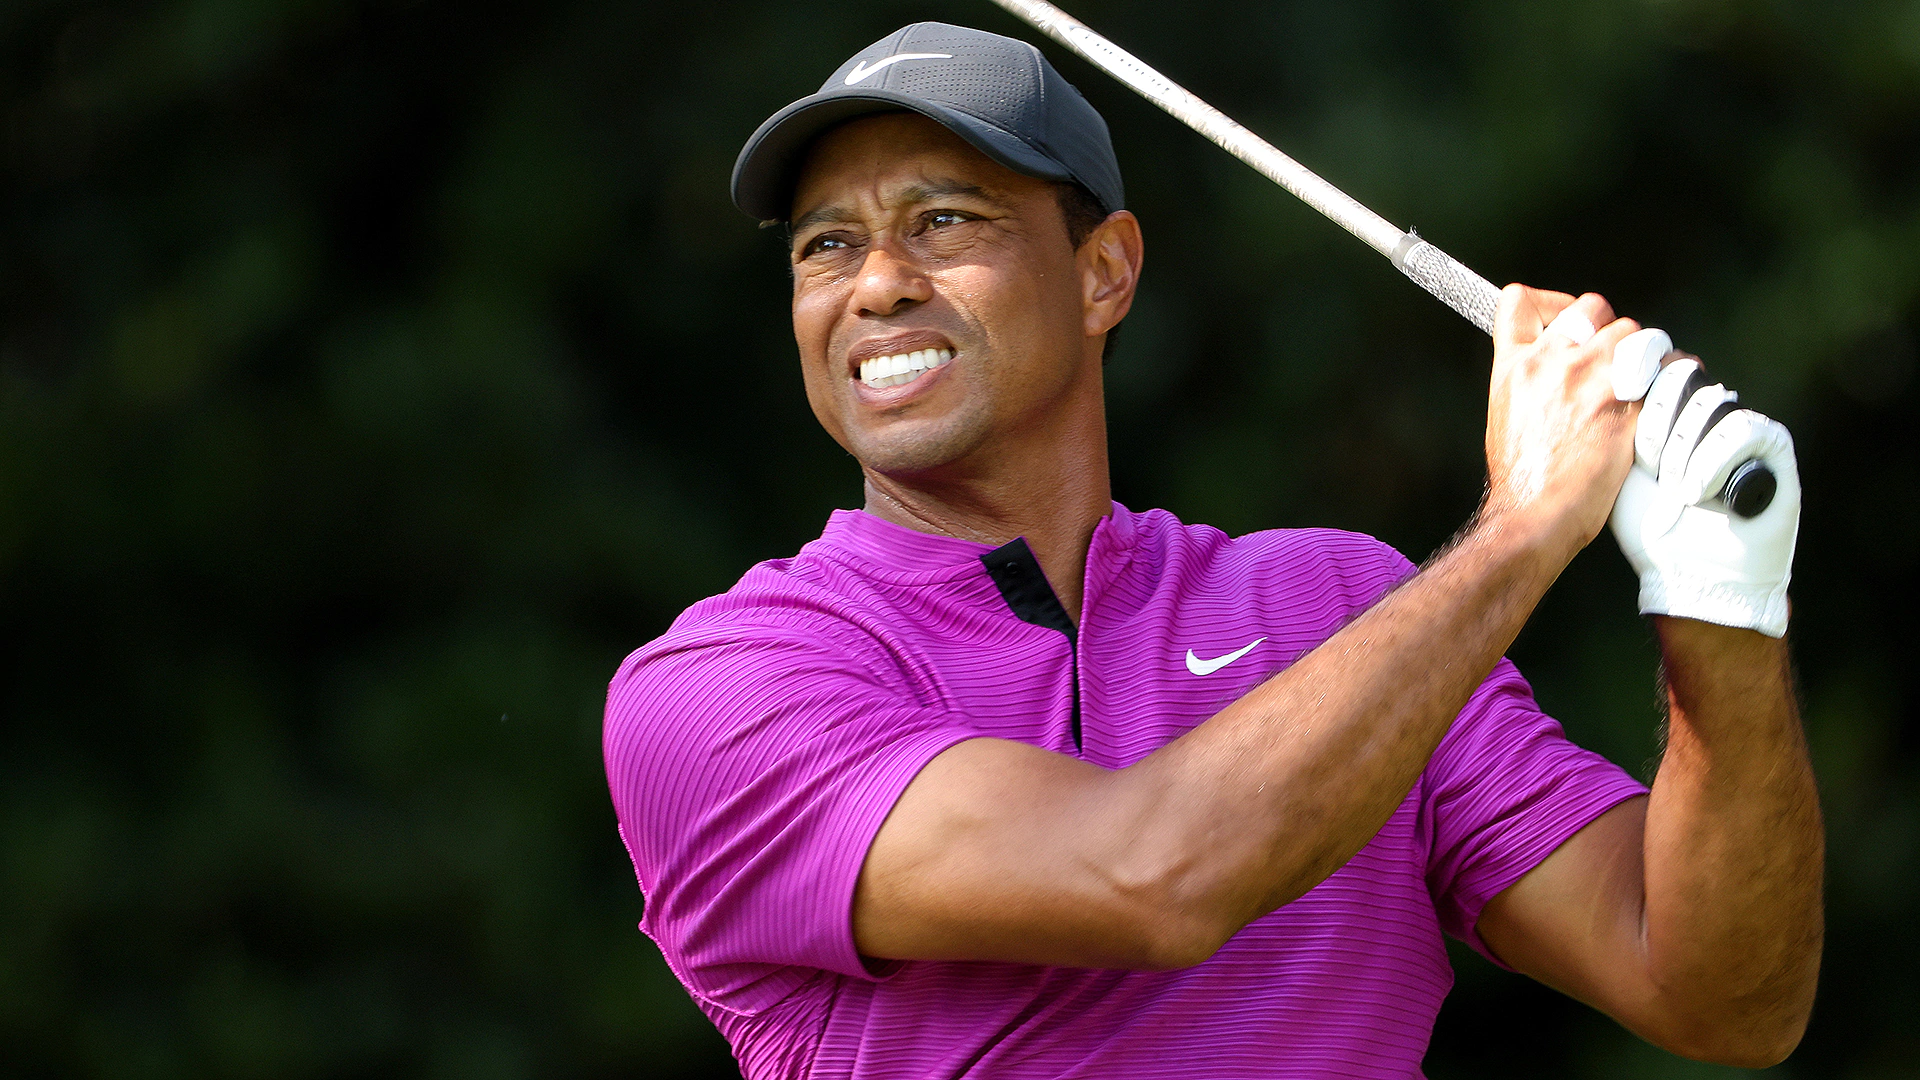 Playing 26 holes on Saturday takes its toll on Tiger Woods’ back at Masters